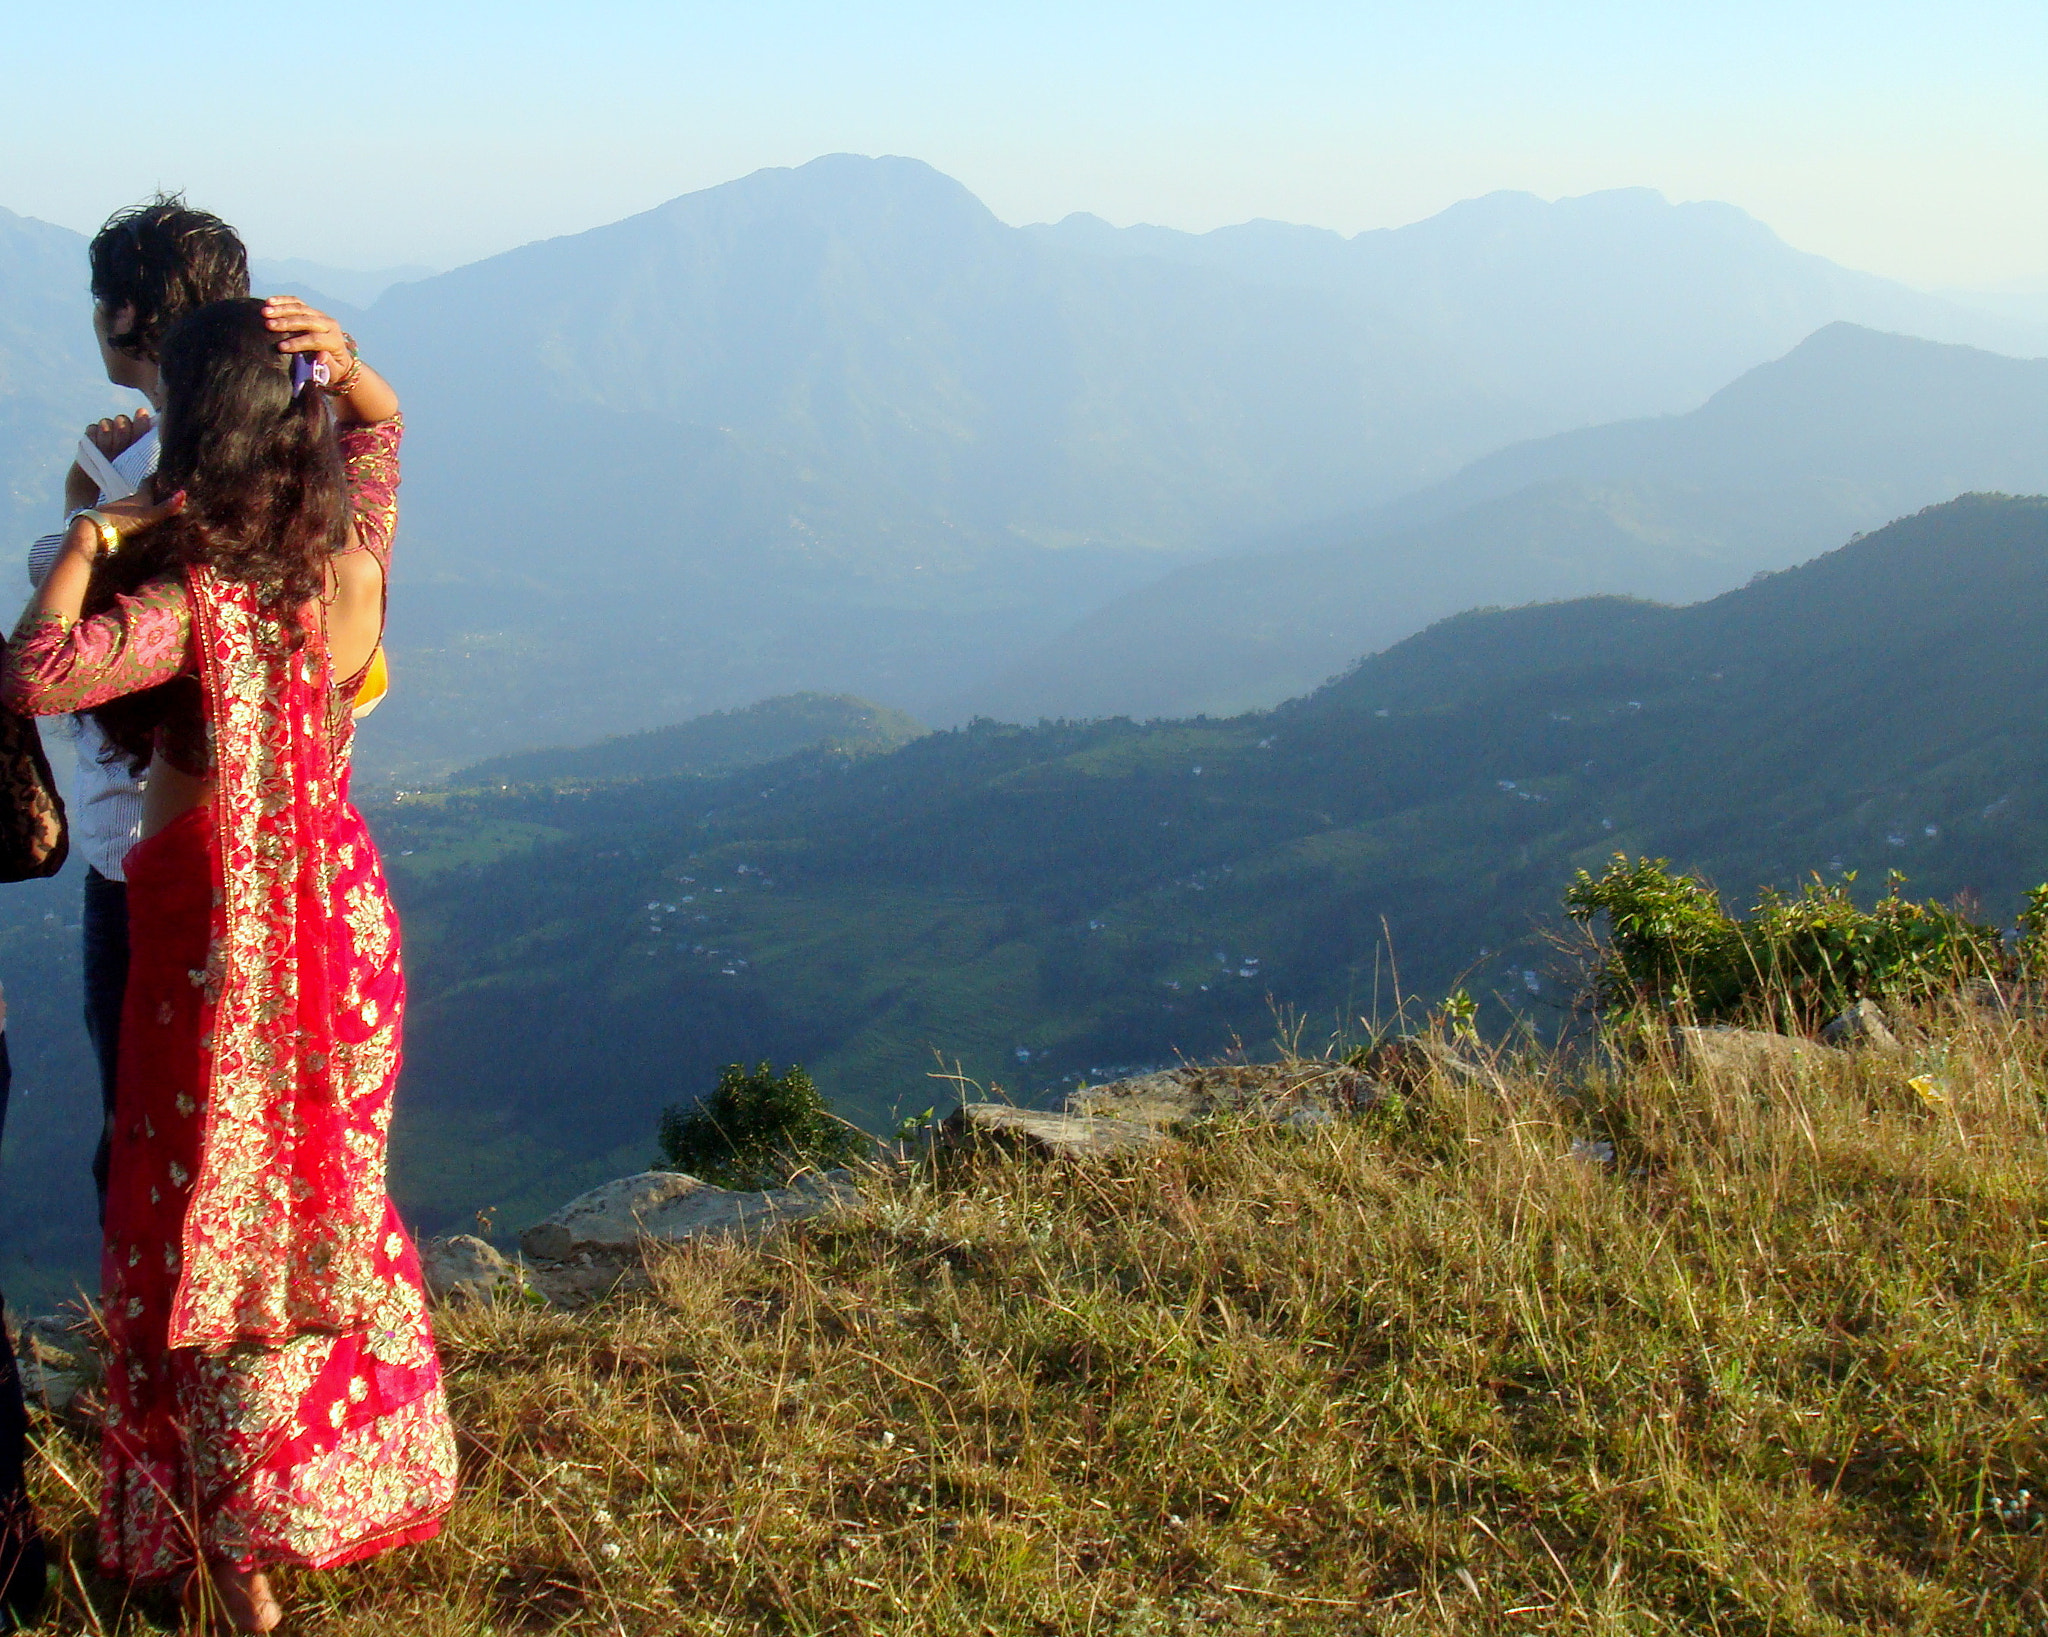 Sony DSC-T20 sample photo. Nature + girl with sari photography